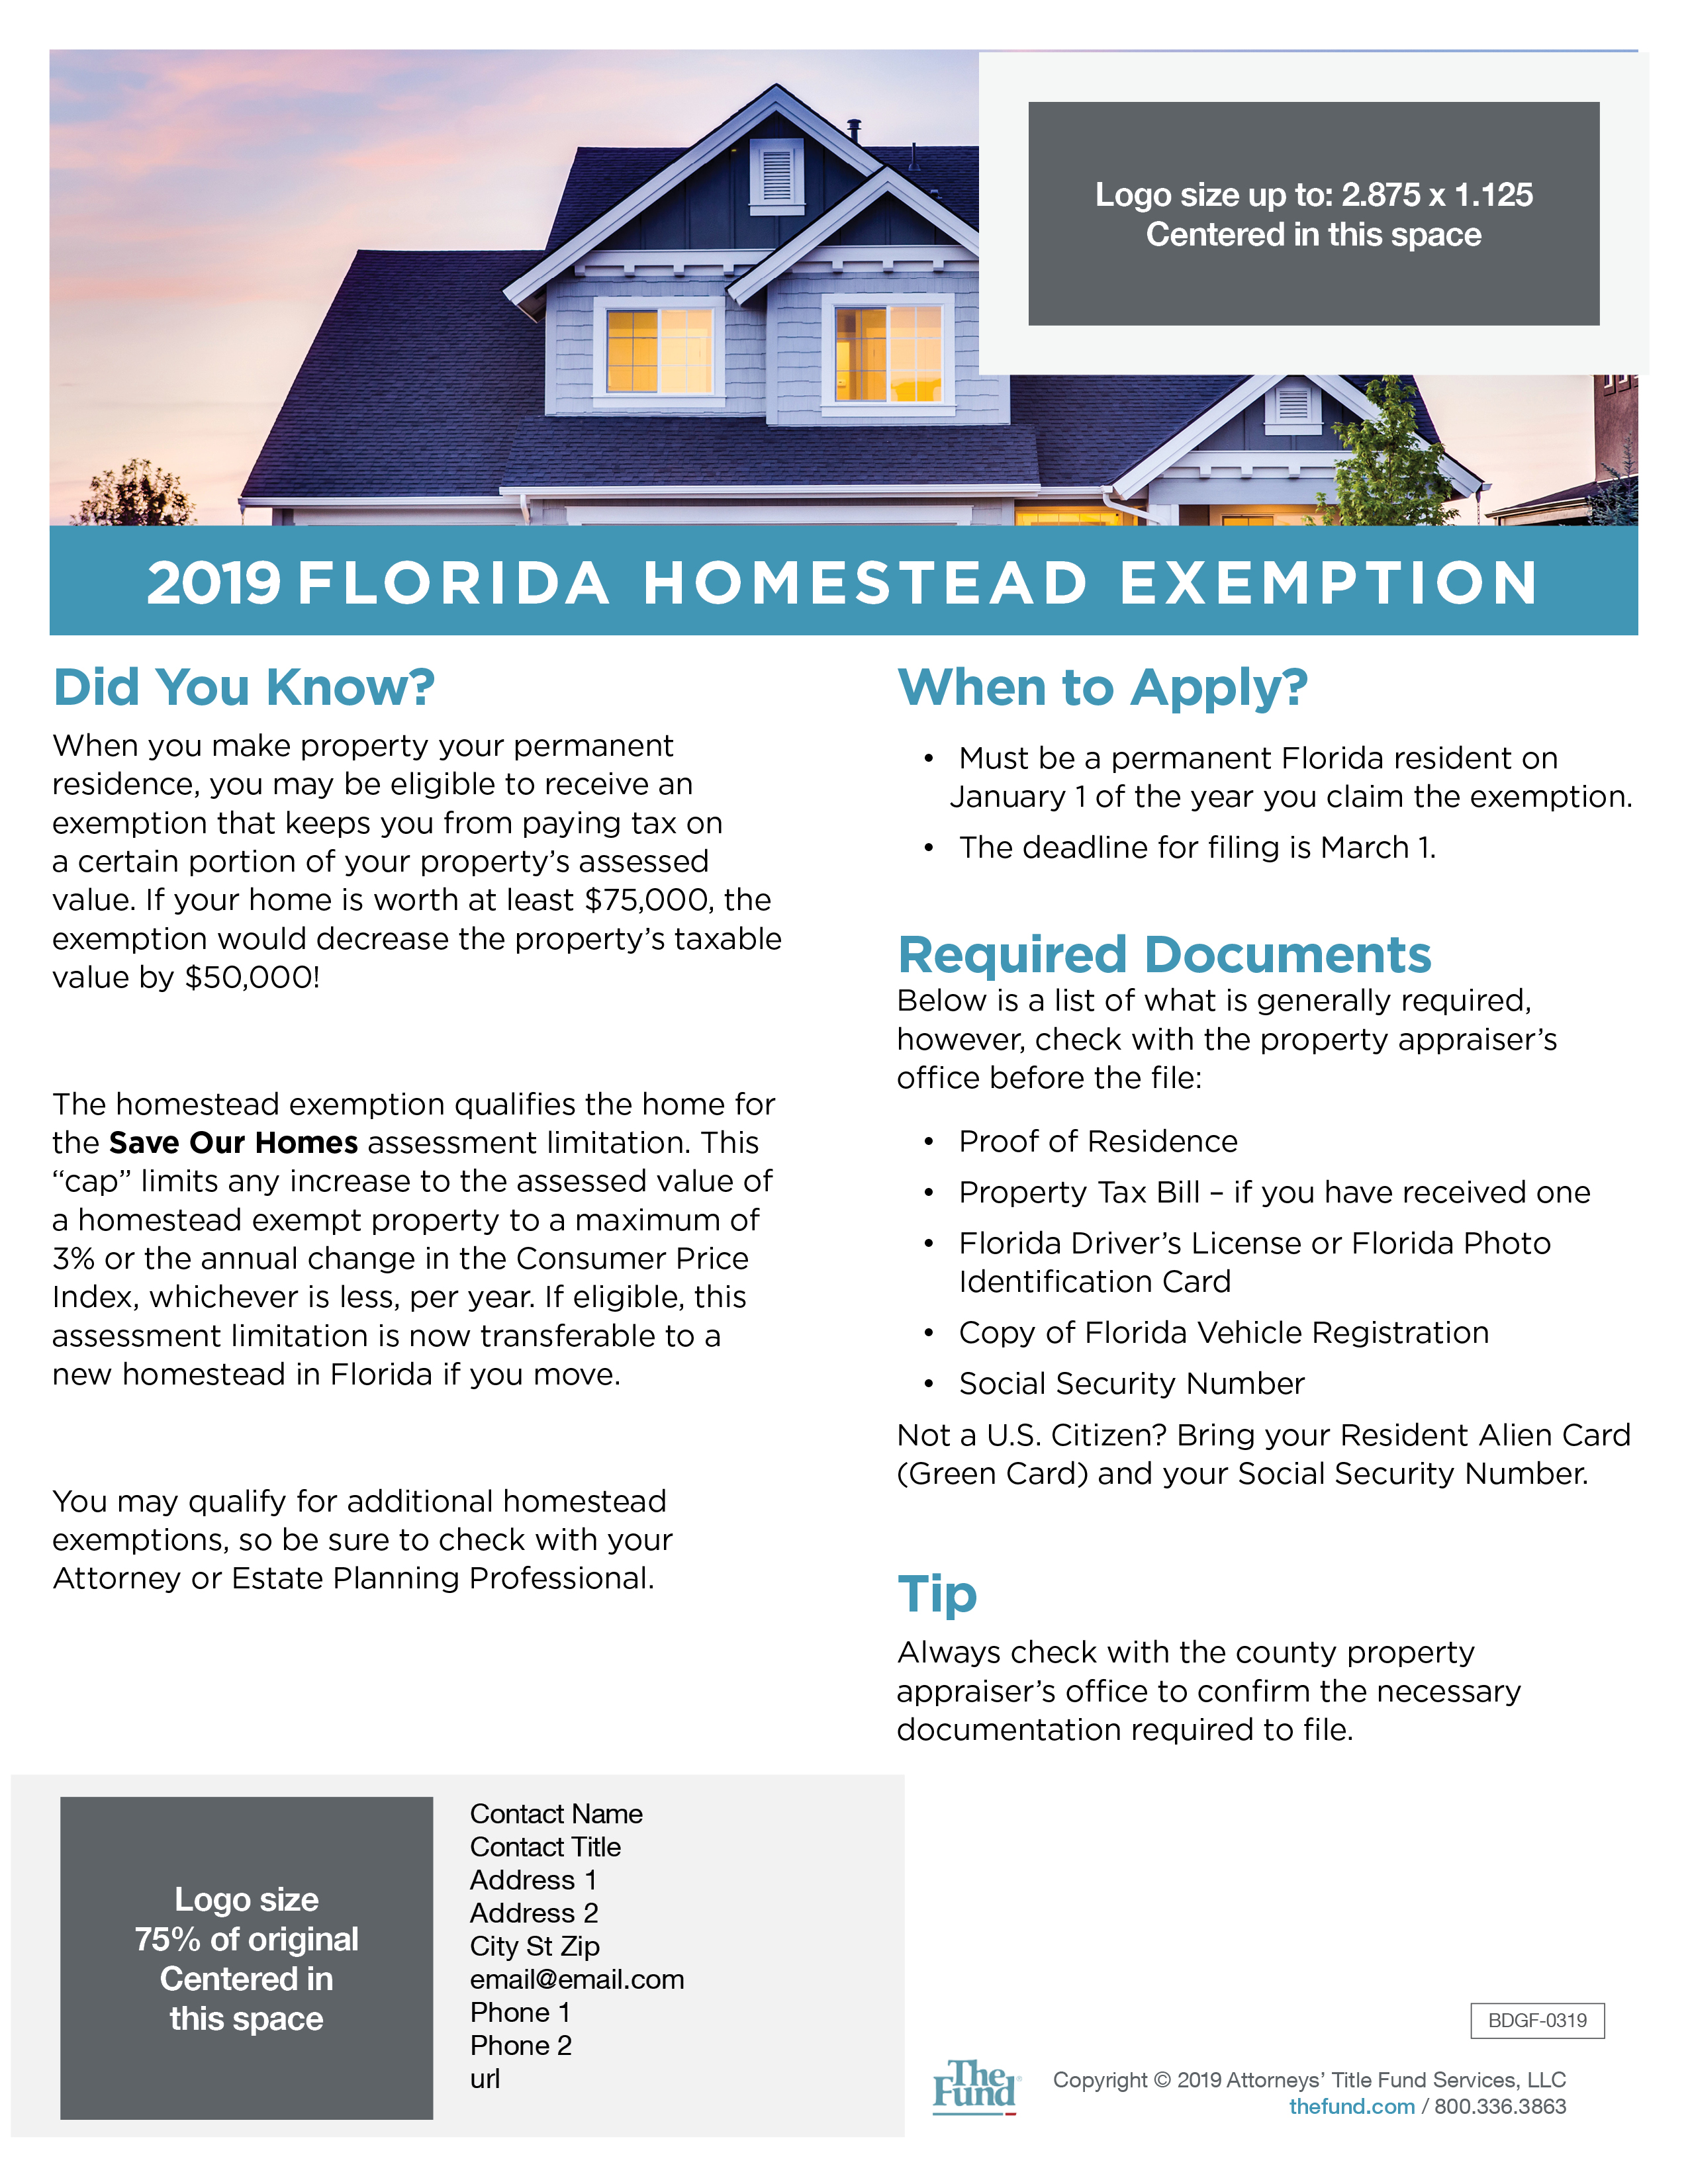 how-to-file-for-florida-homestead-exemption-smart-title